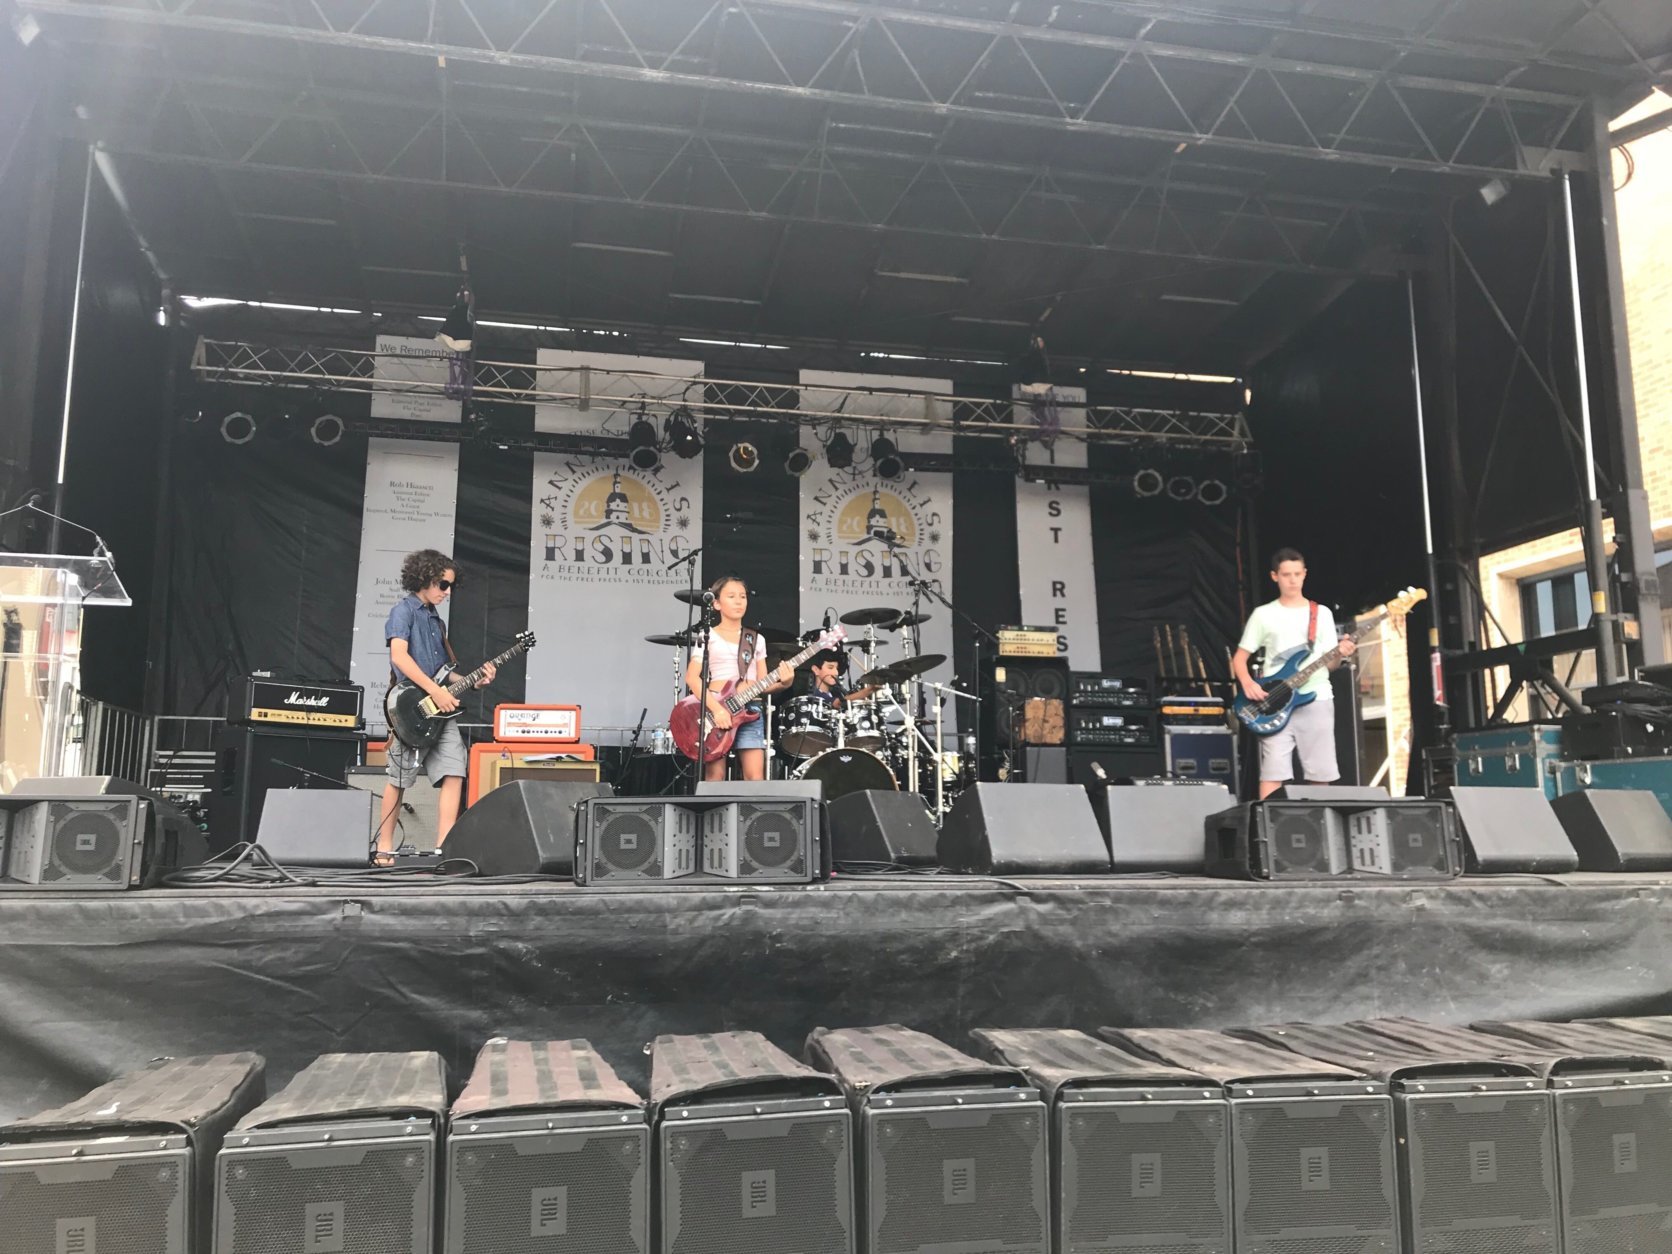 The "Annapolis Rising" benefit concert was a benefit for family members of the Capital Gazette shooting. It was also intended to salute a free press and first responders. (WTOP/Dick Uliano)